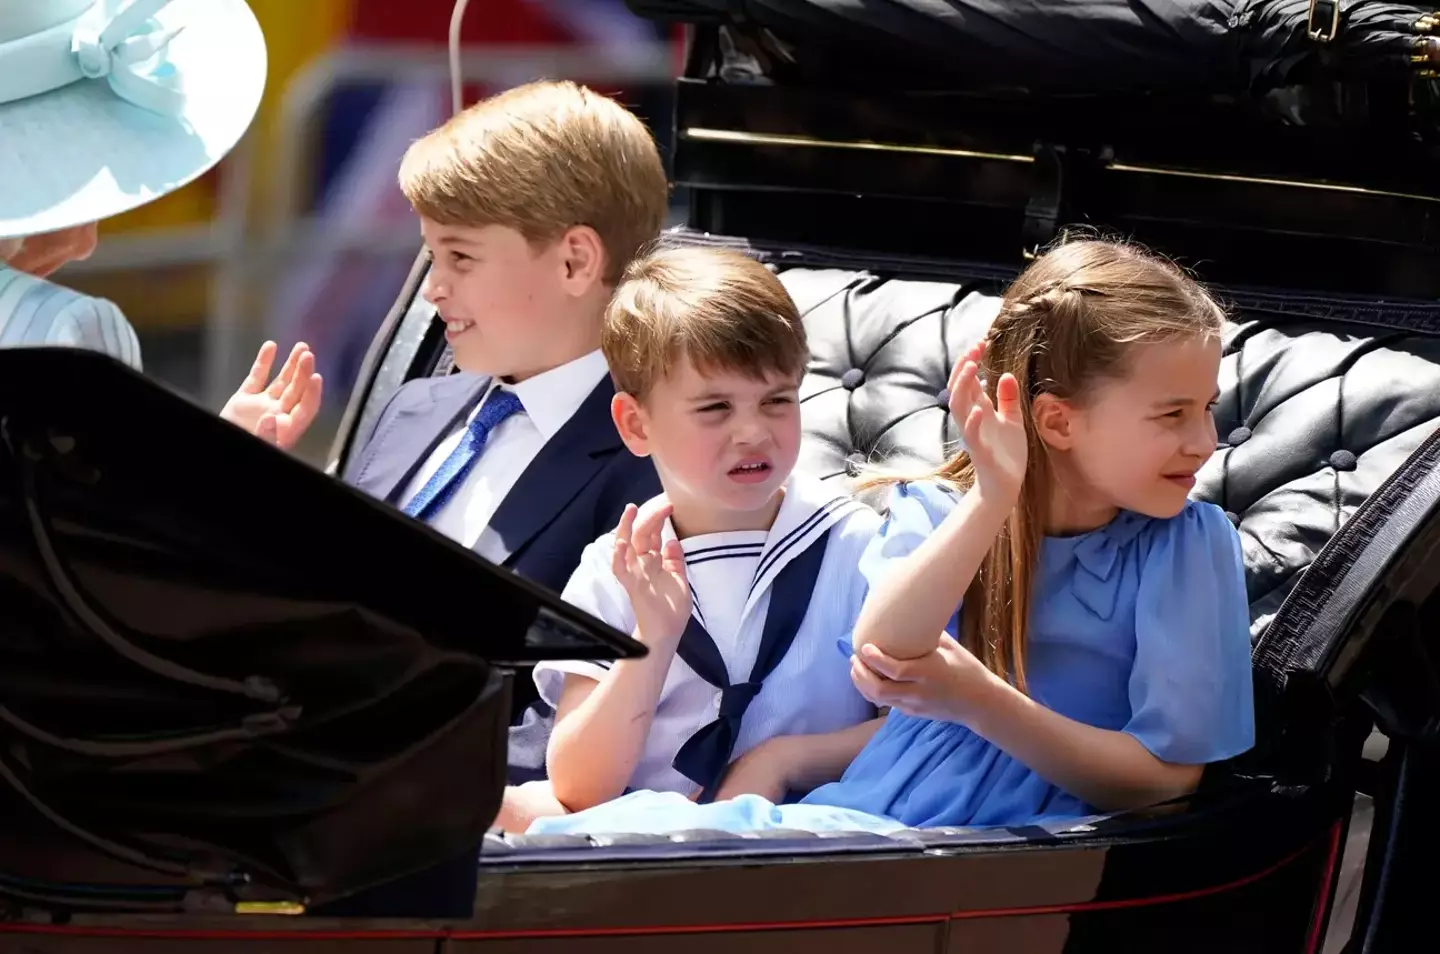 Kate Middleton and Prince William’s children made their debut during a carriage ride at Trooping the Colour on Thursday.